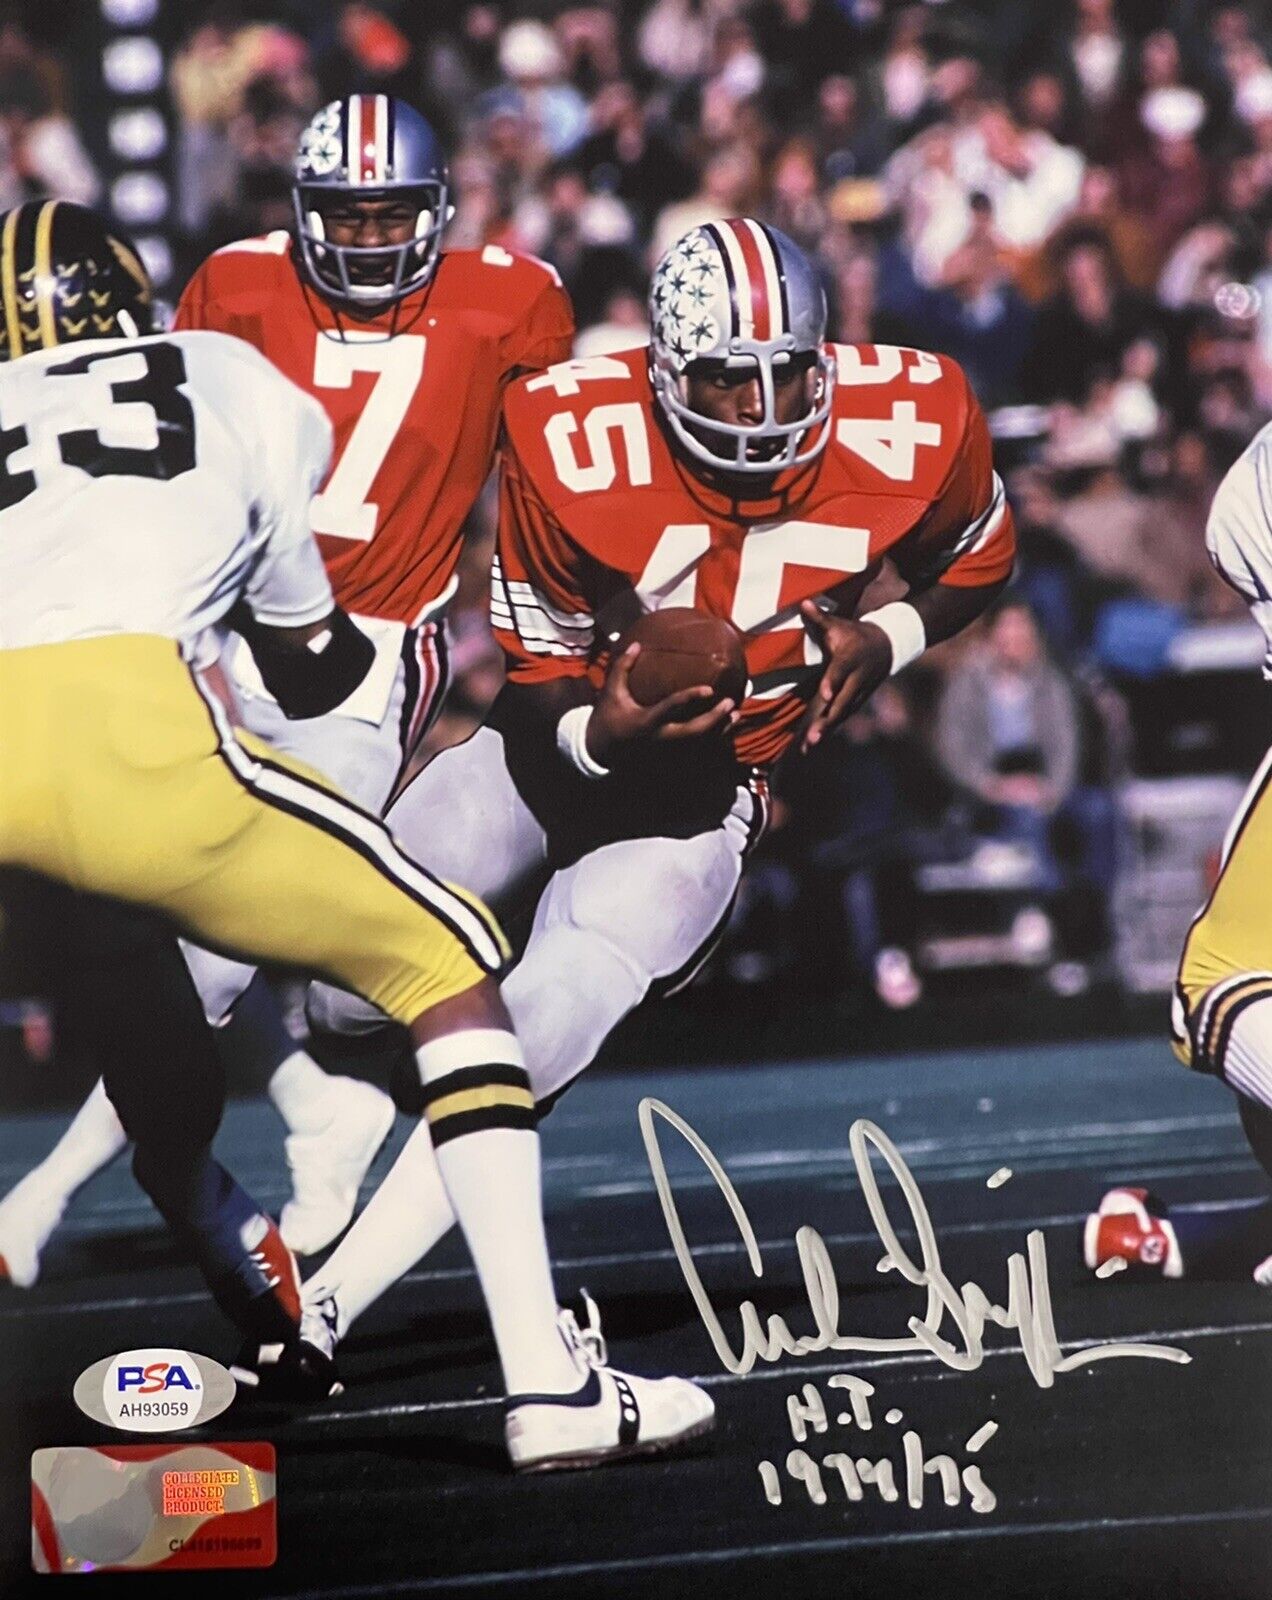 Archie Griffin Signed Autographed The Ohio State Buckeyes 8x10 Photo Poster painting Psa/Dna